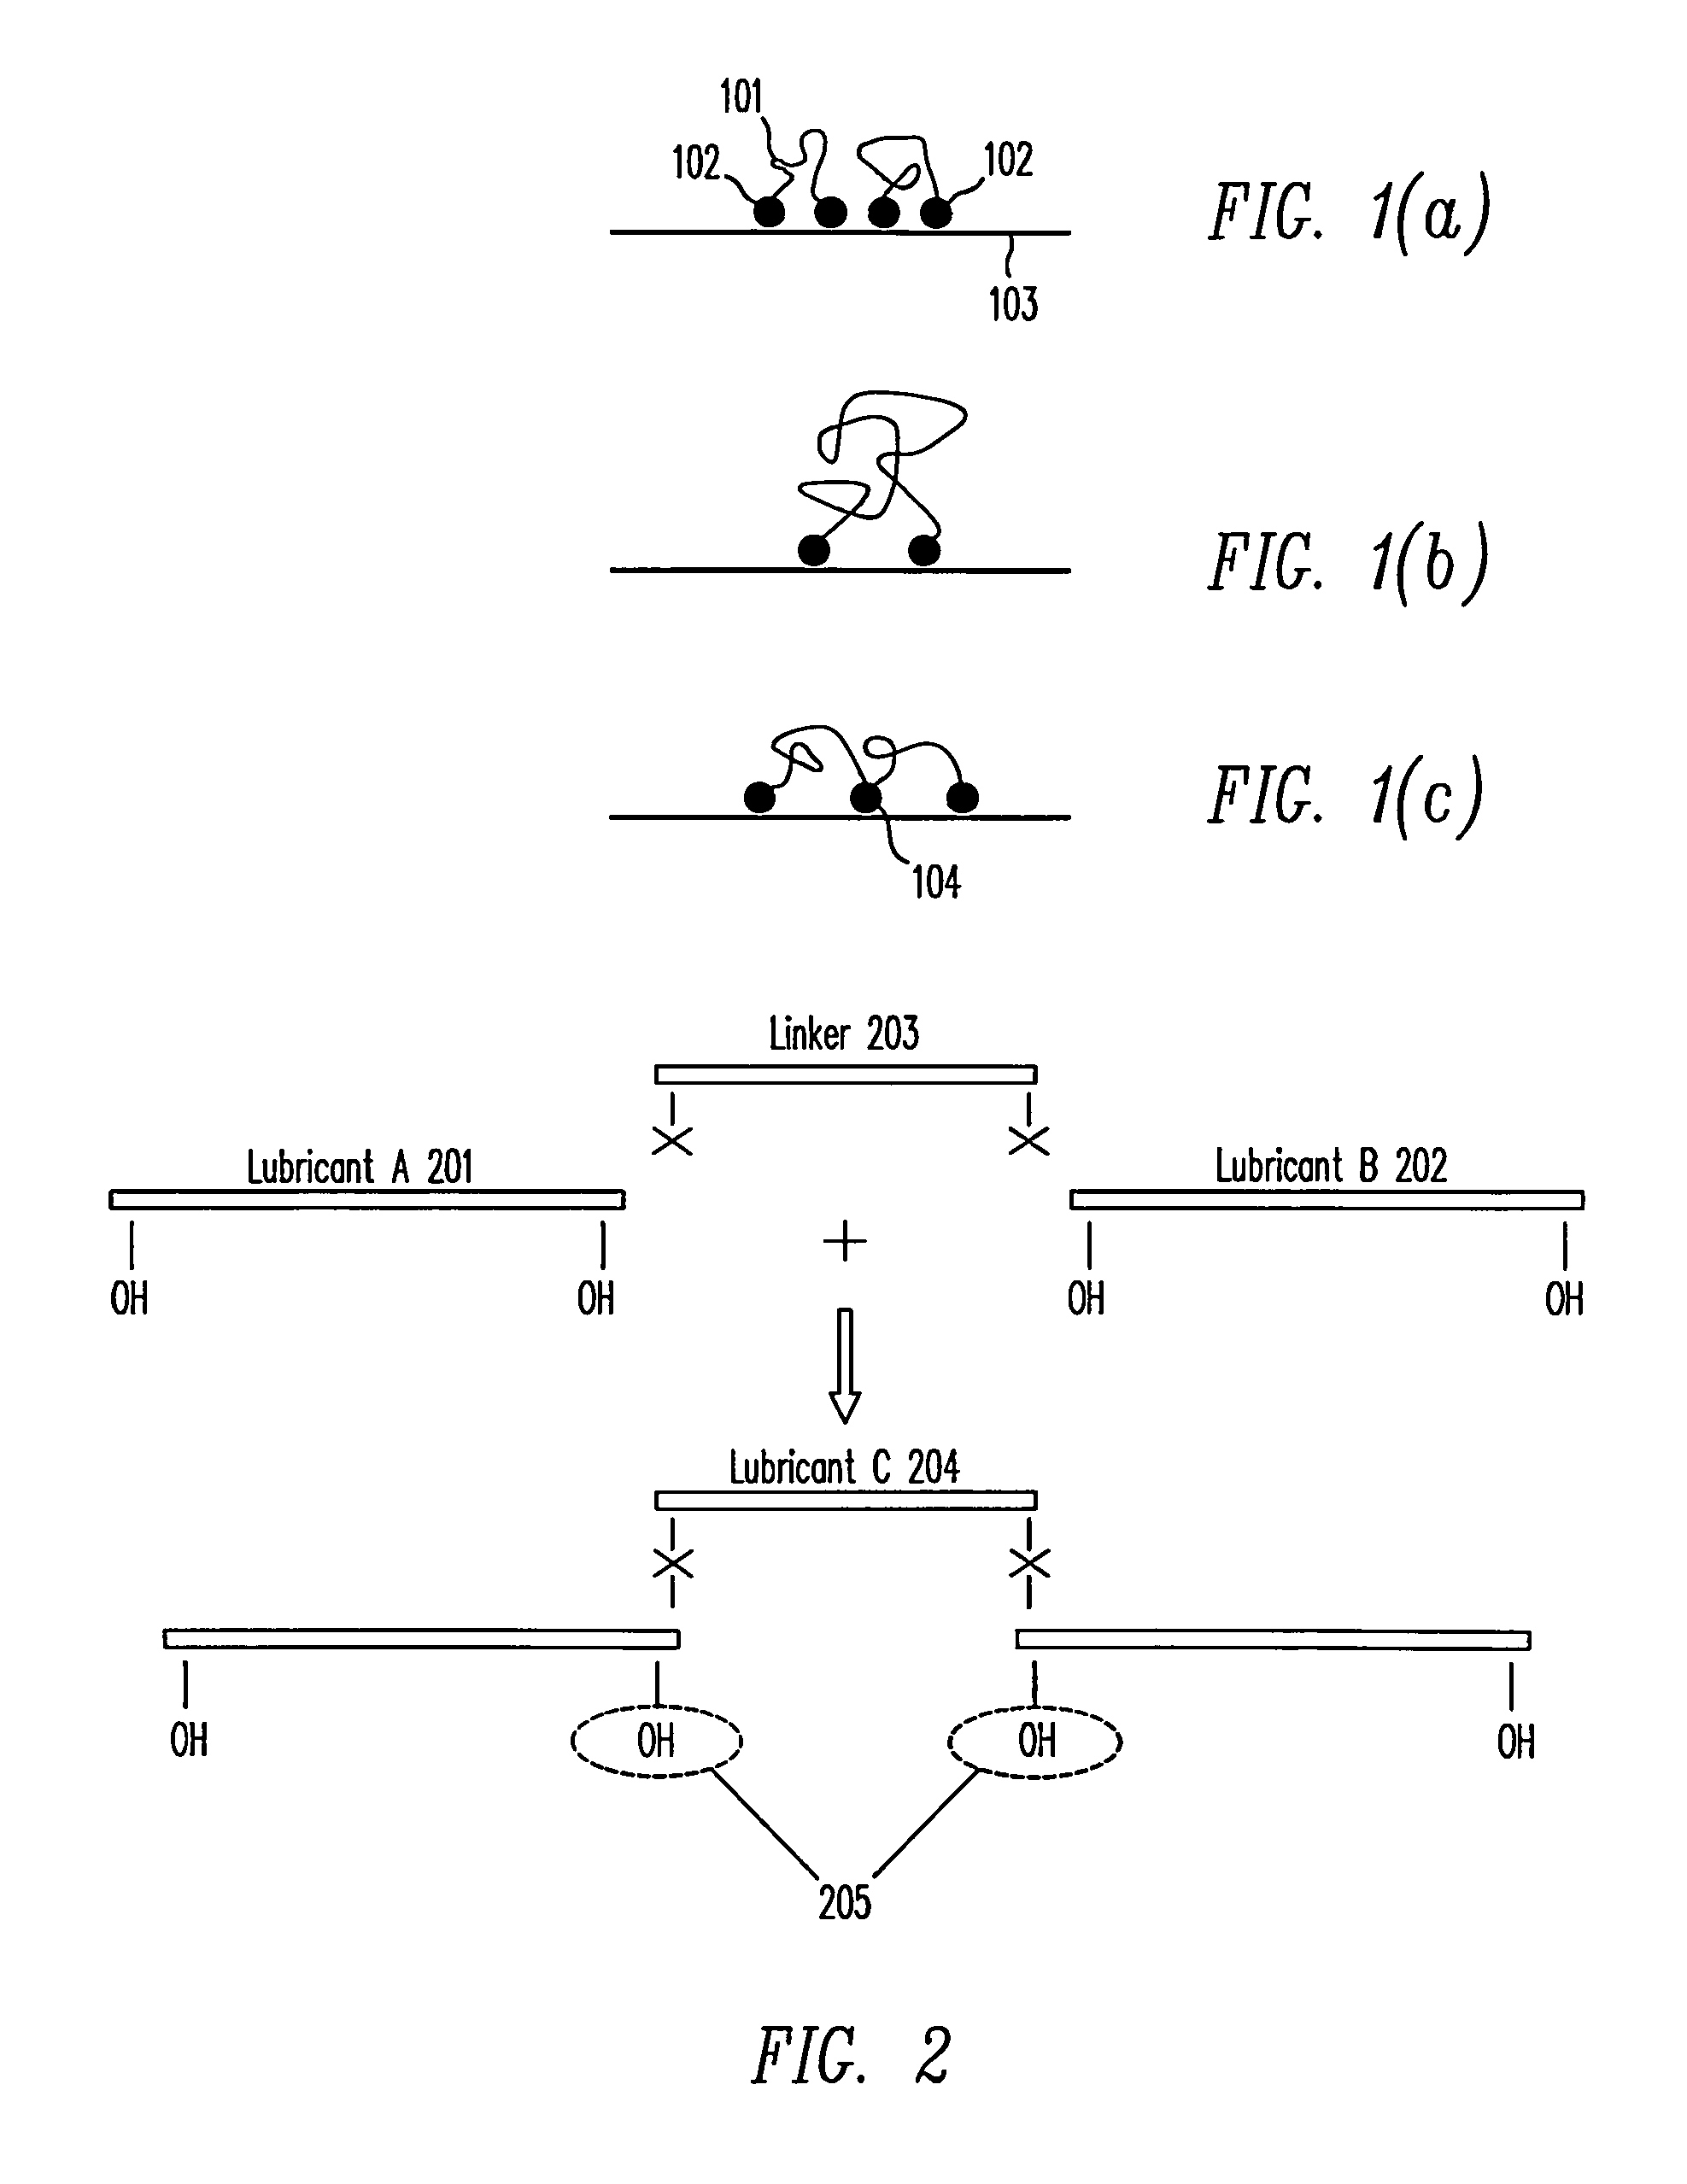 Lubricant with non-terminal functional groups